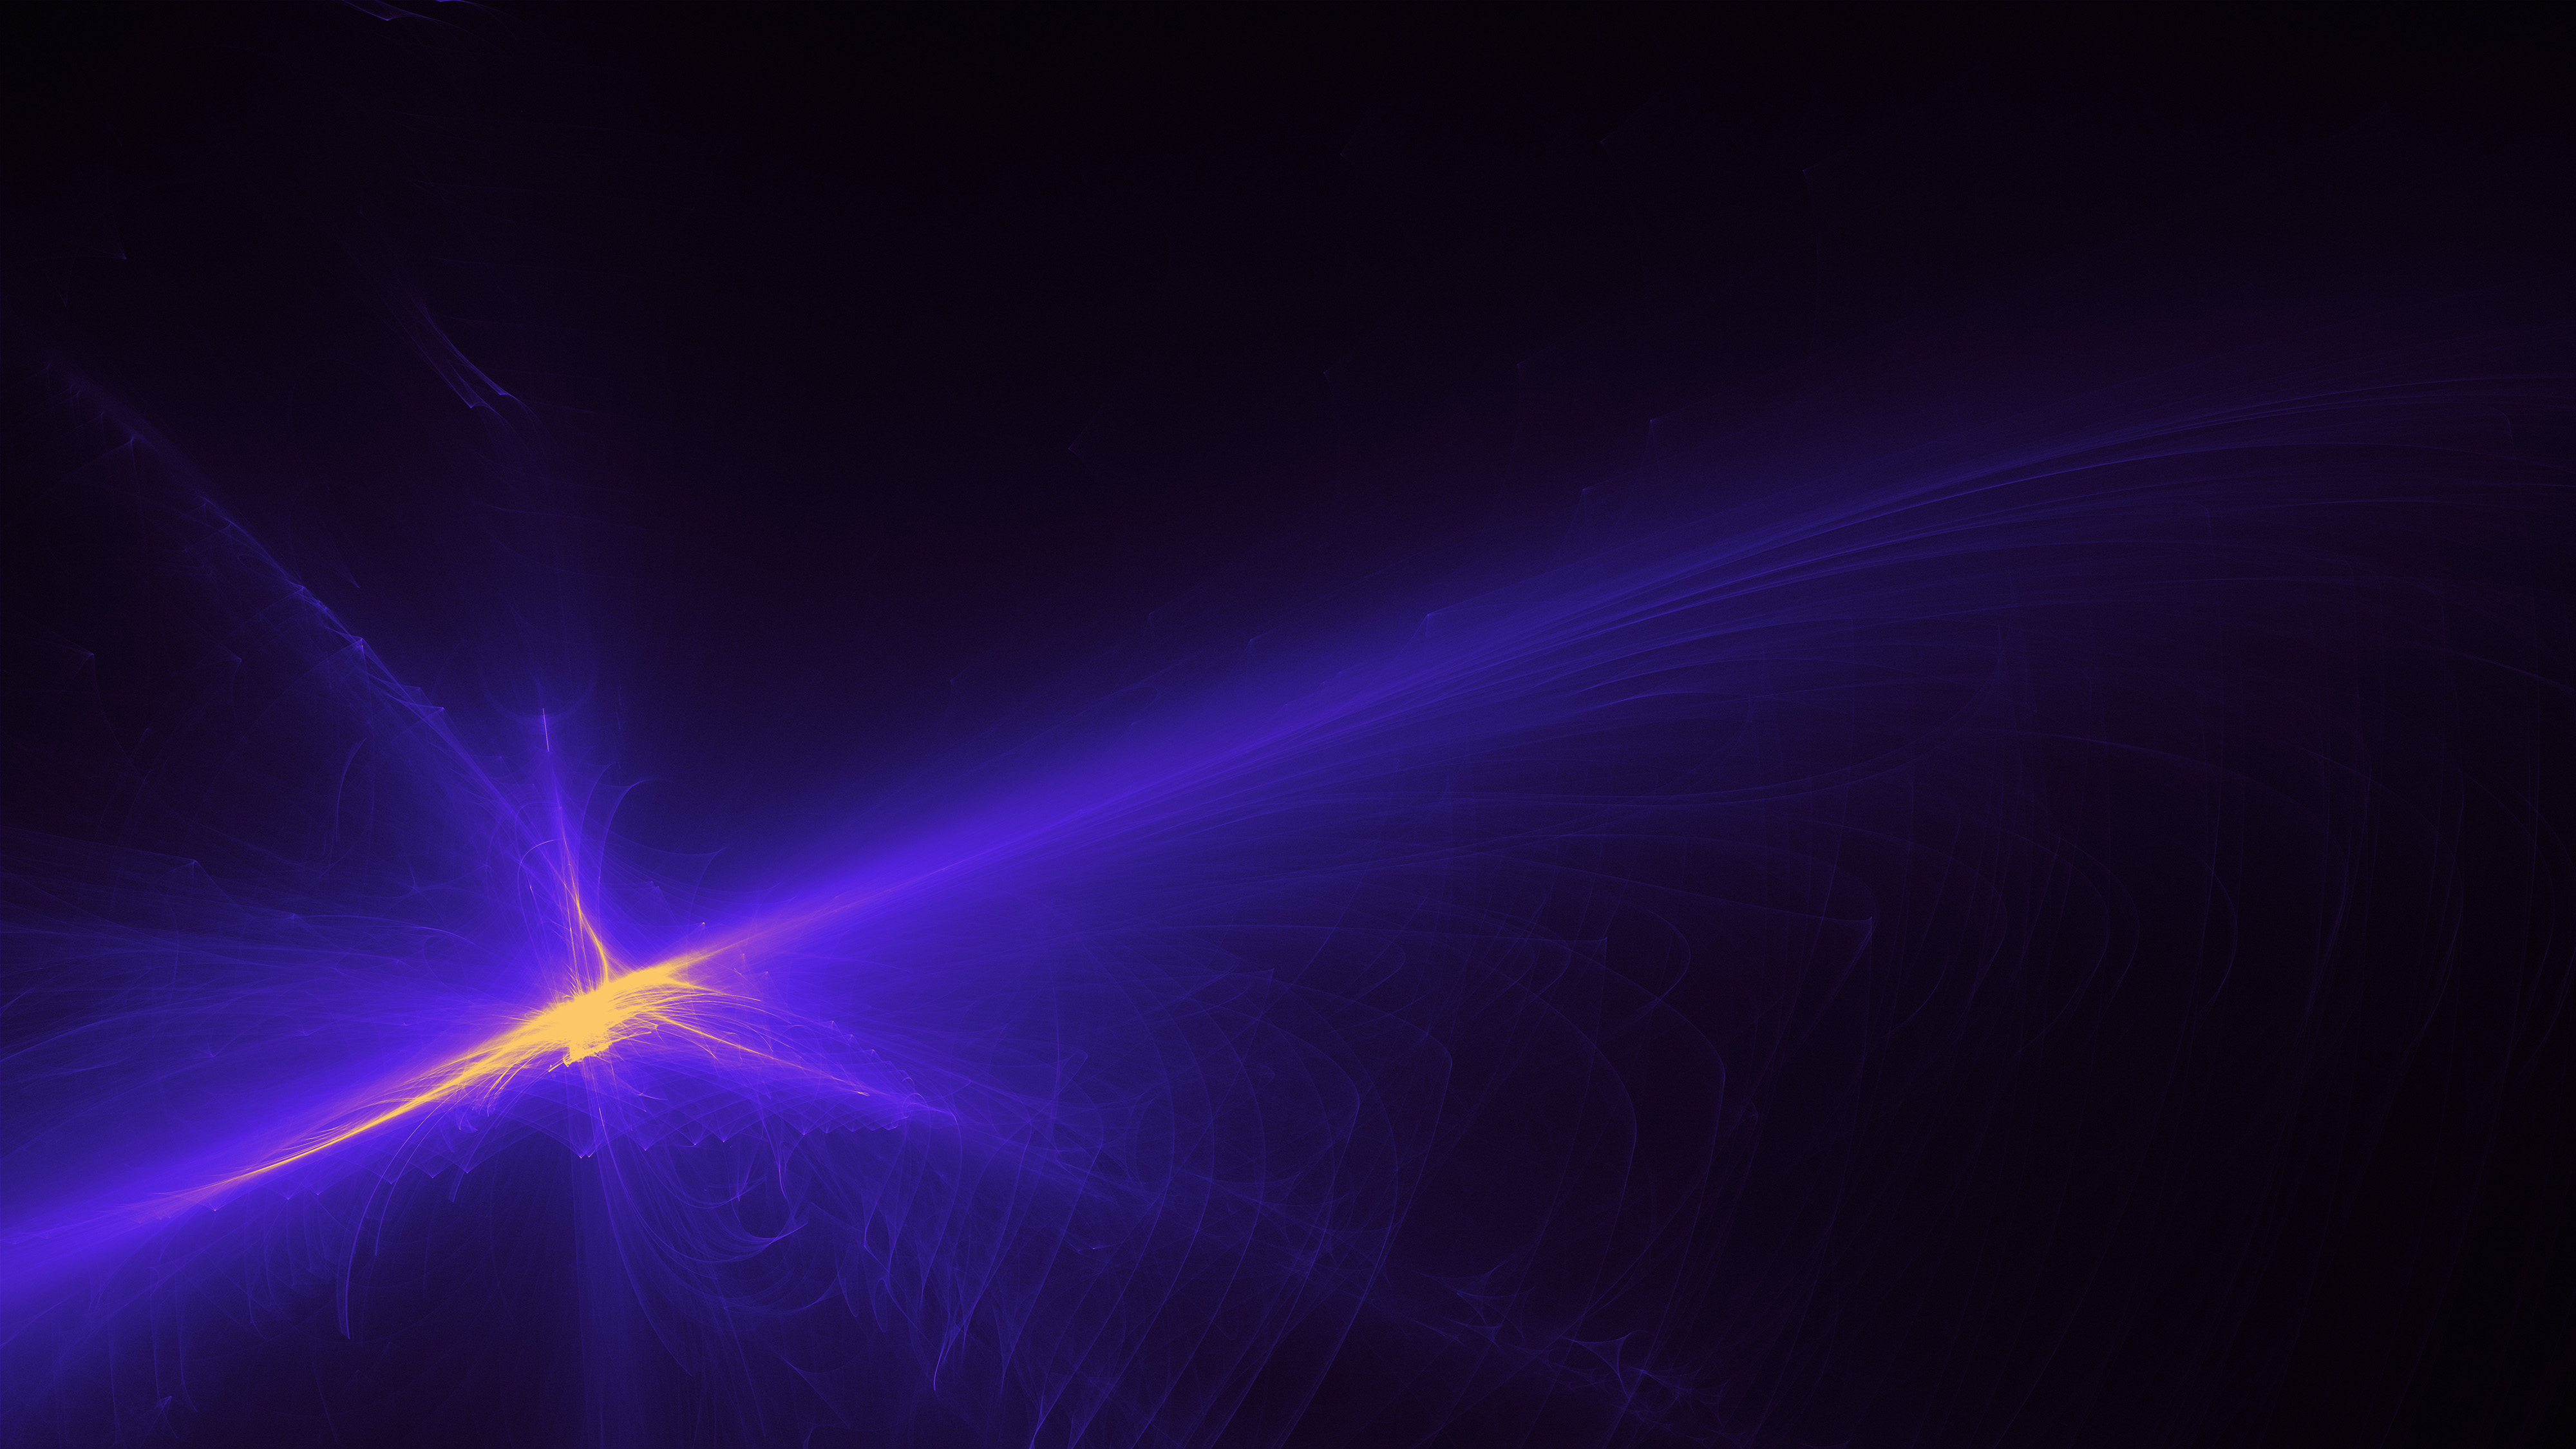 beams, purple, violet, rays, abstract, fractal Full HD